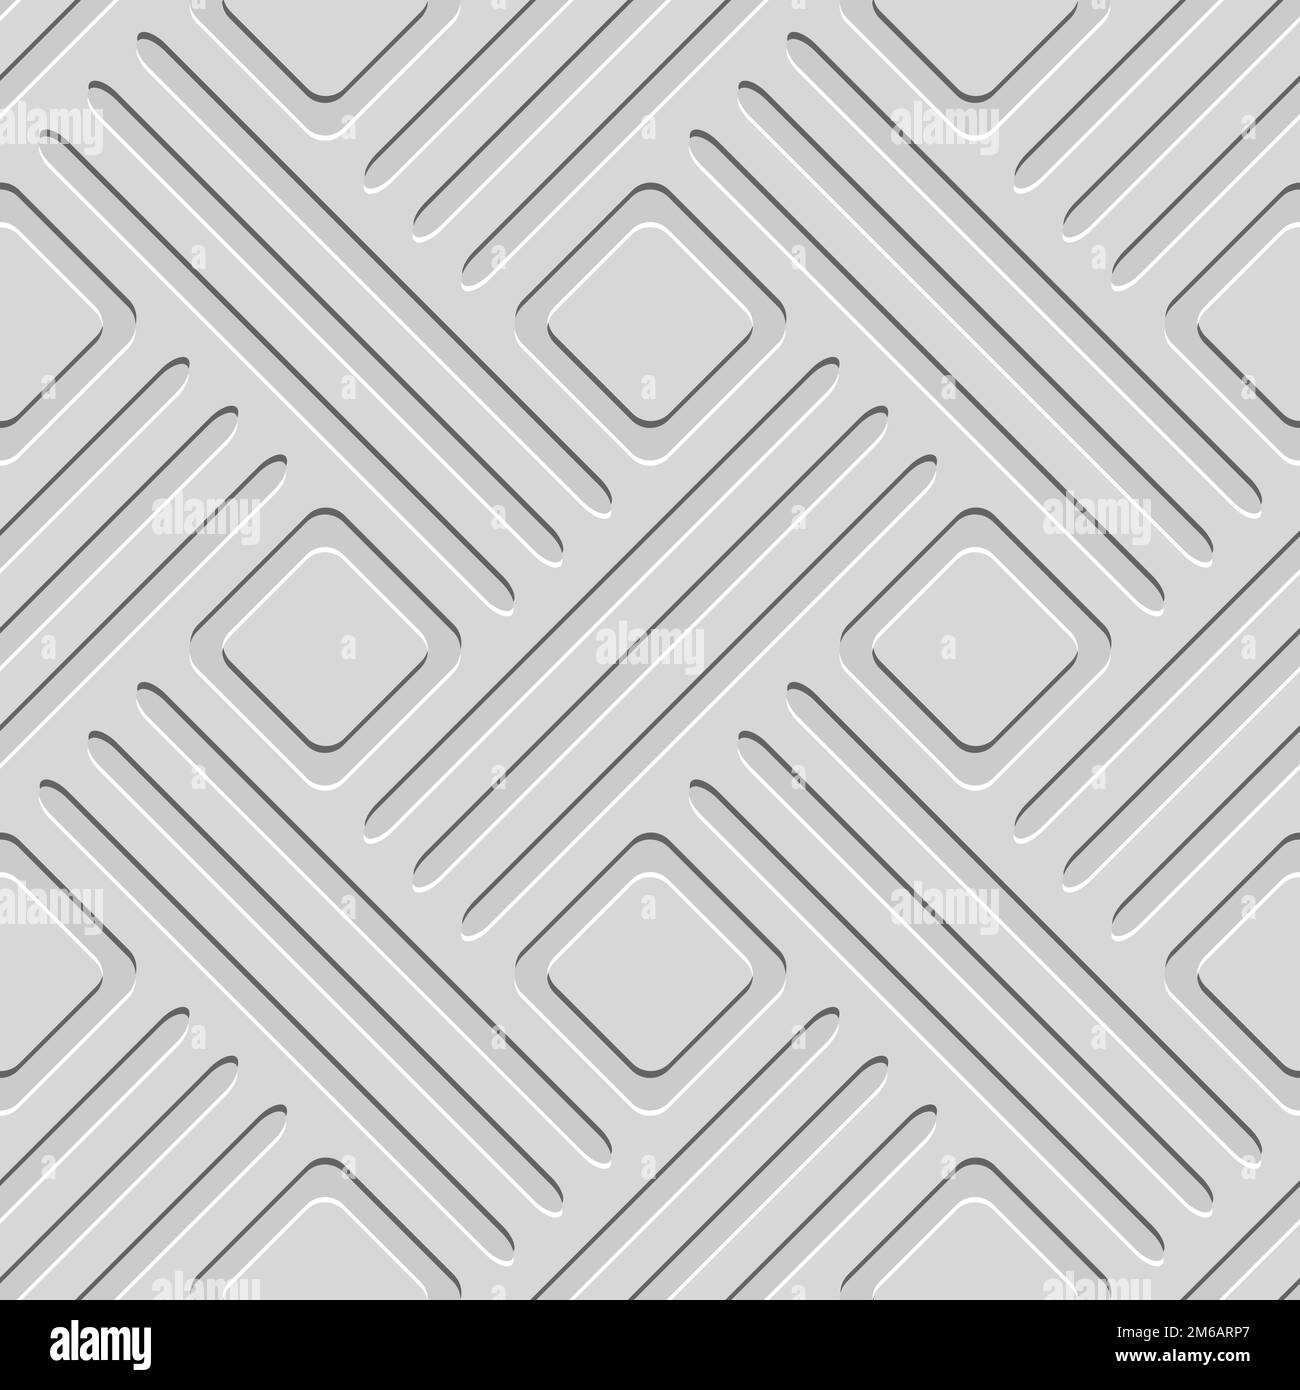 Embossed wallpaper Black and White Stock Photos & Images - Alamy